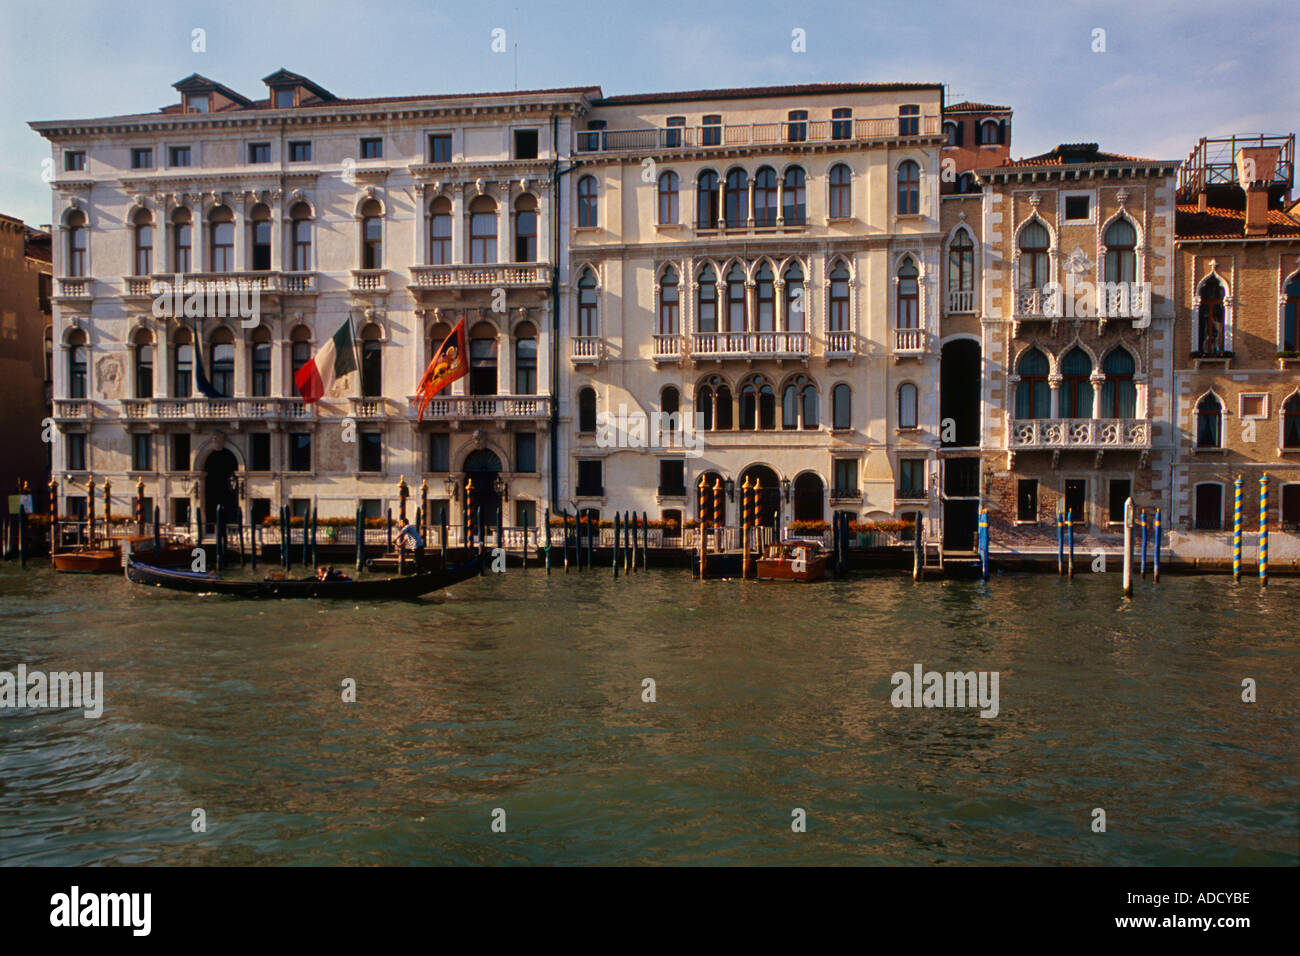 Palazzo Ferro Fini High Resolution Stock Photography and Images - Alamy